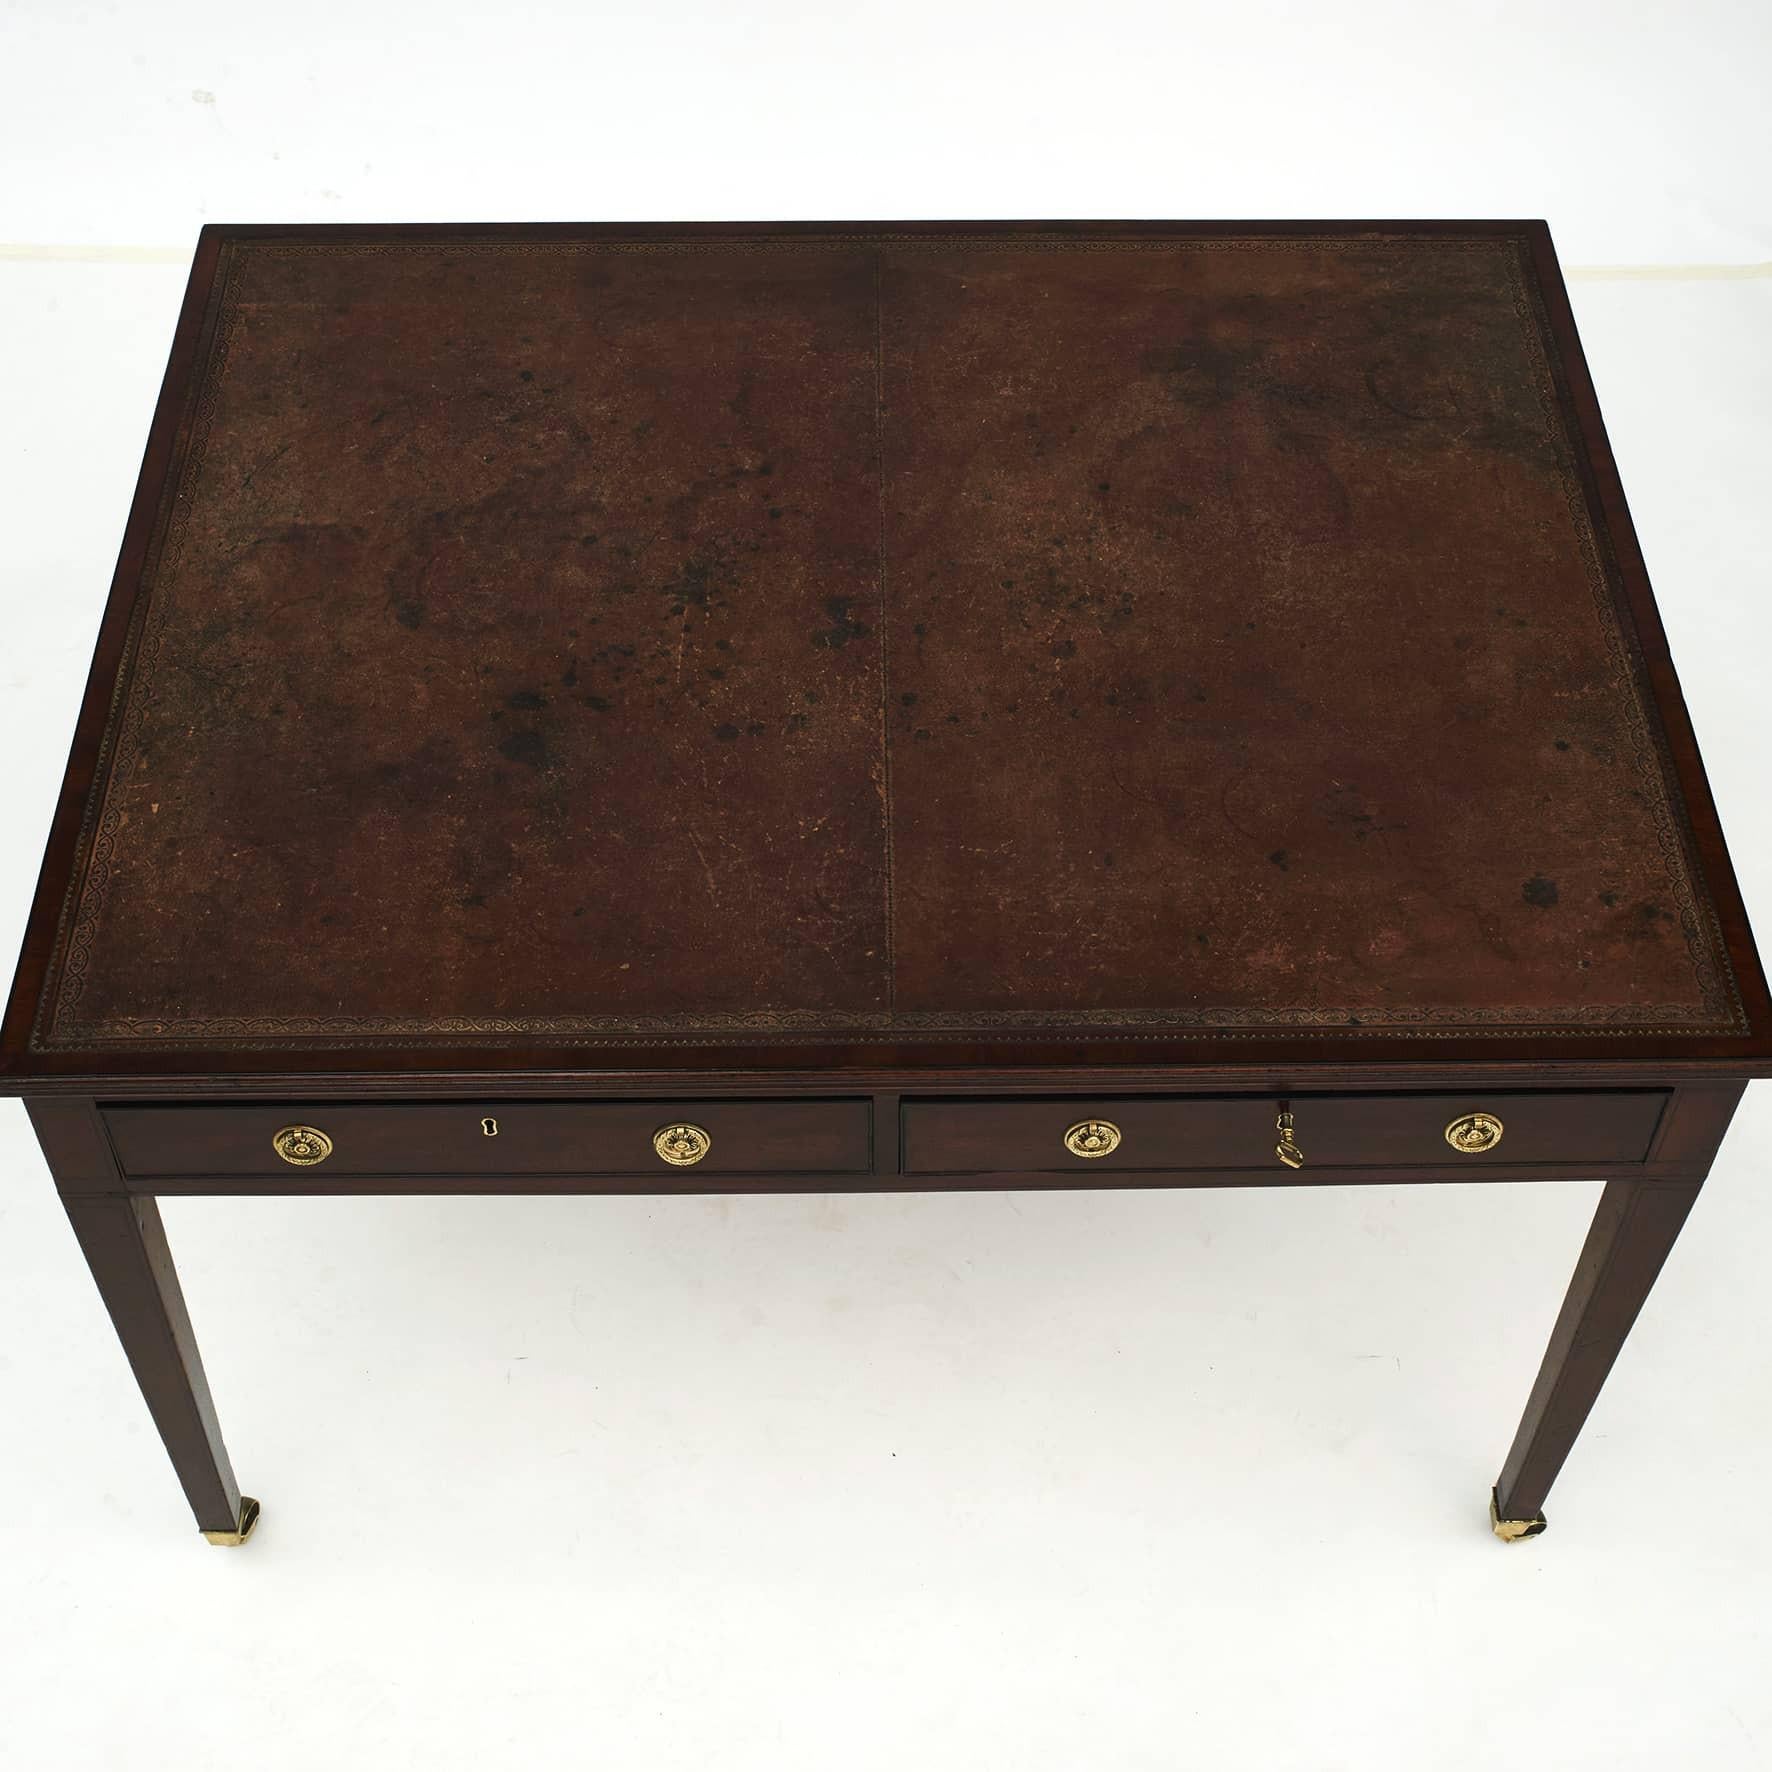 19th Century English Regency Partners Desk in Mahogany with Leather Top, England, 1810-1820